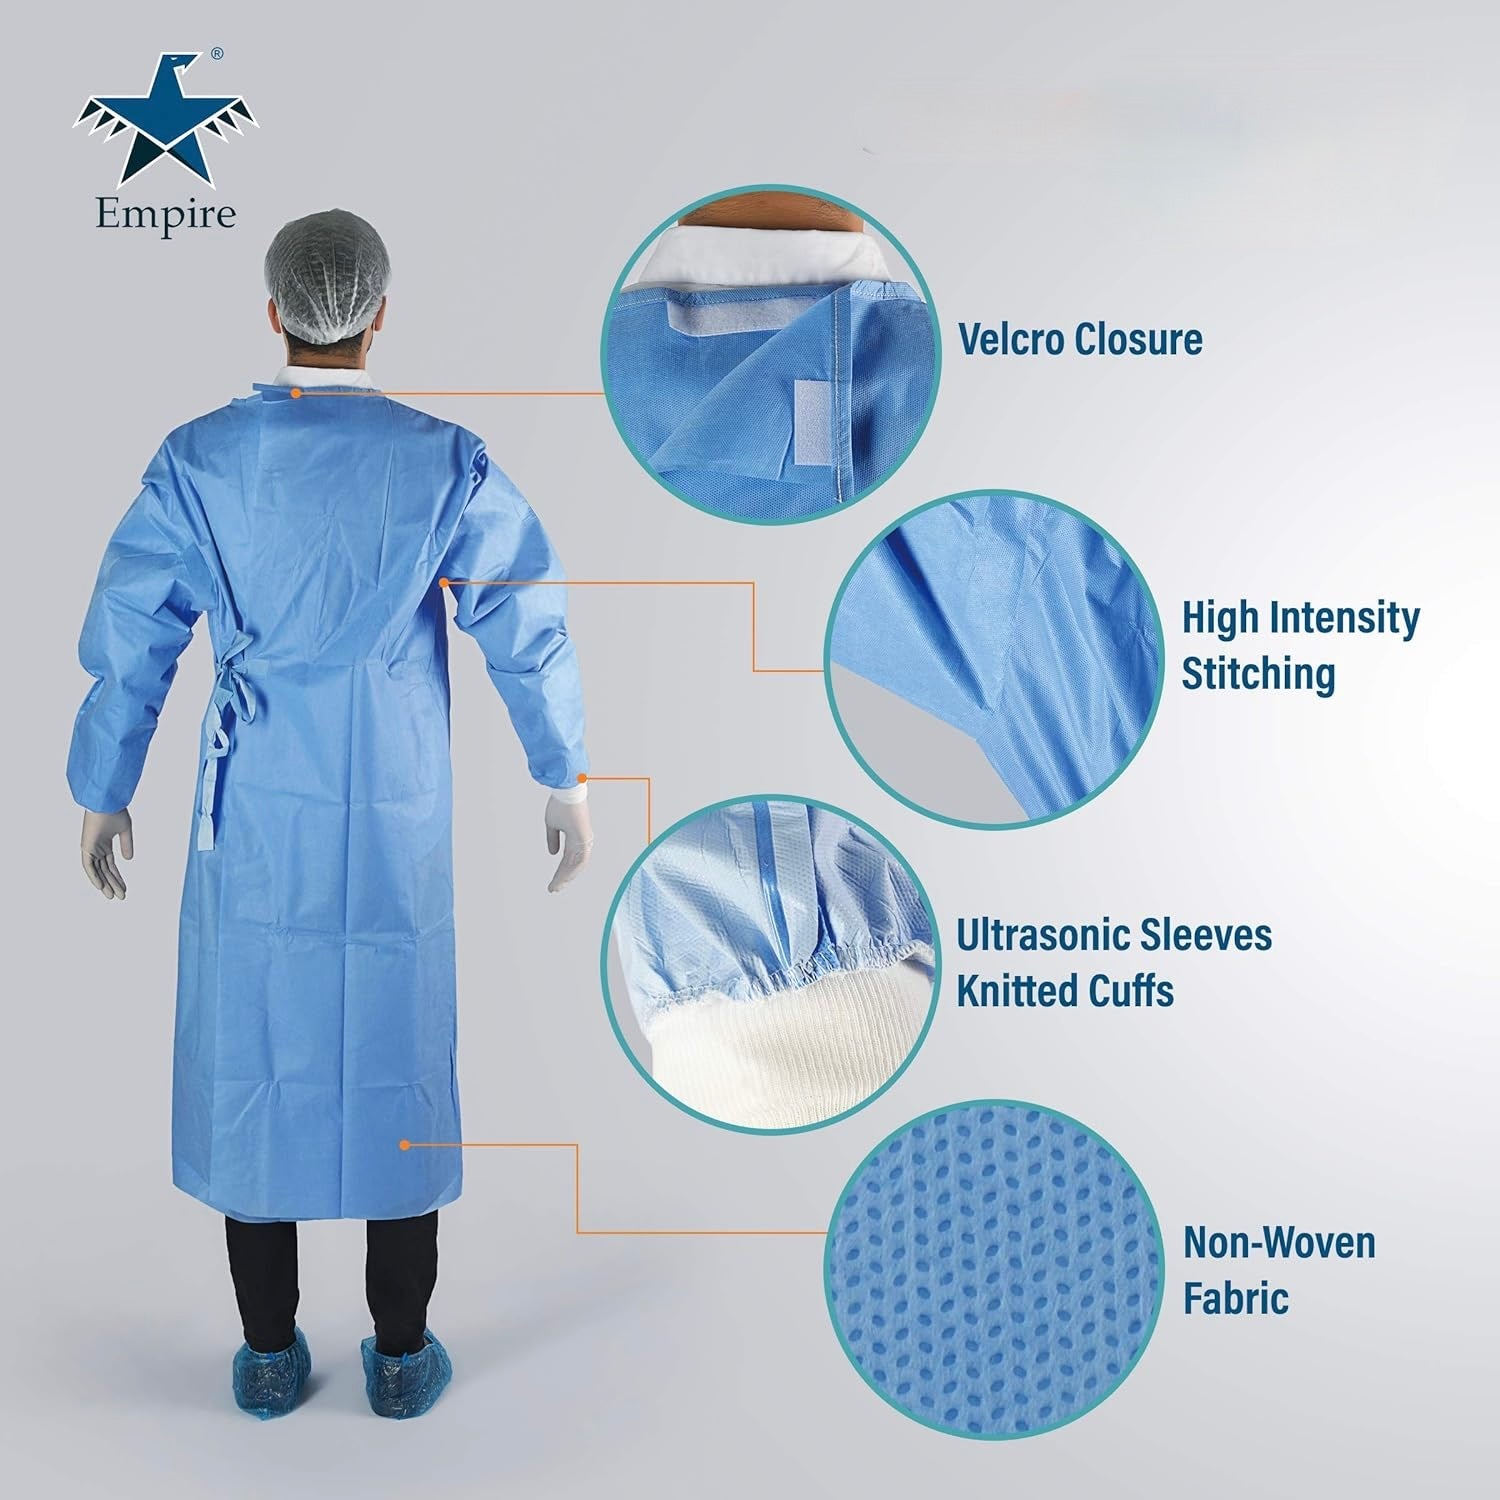 Case 40 Zonal Reinforced Sterile Surgical Gown Double Wrapped with 2 Hand Towels 30 x 40 cm 43gsm SMMS BODY with 40g PP & PE Reinforcement Fluid Alcohol Water Repellent hook and loop fastening Adjustable neckline Raglan Sleeves Size Large Long LL EN13795